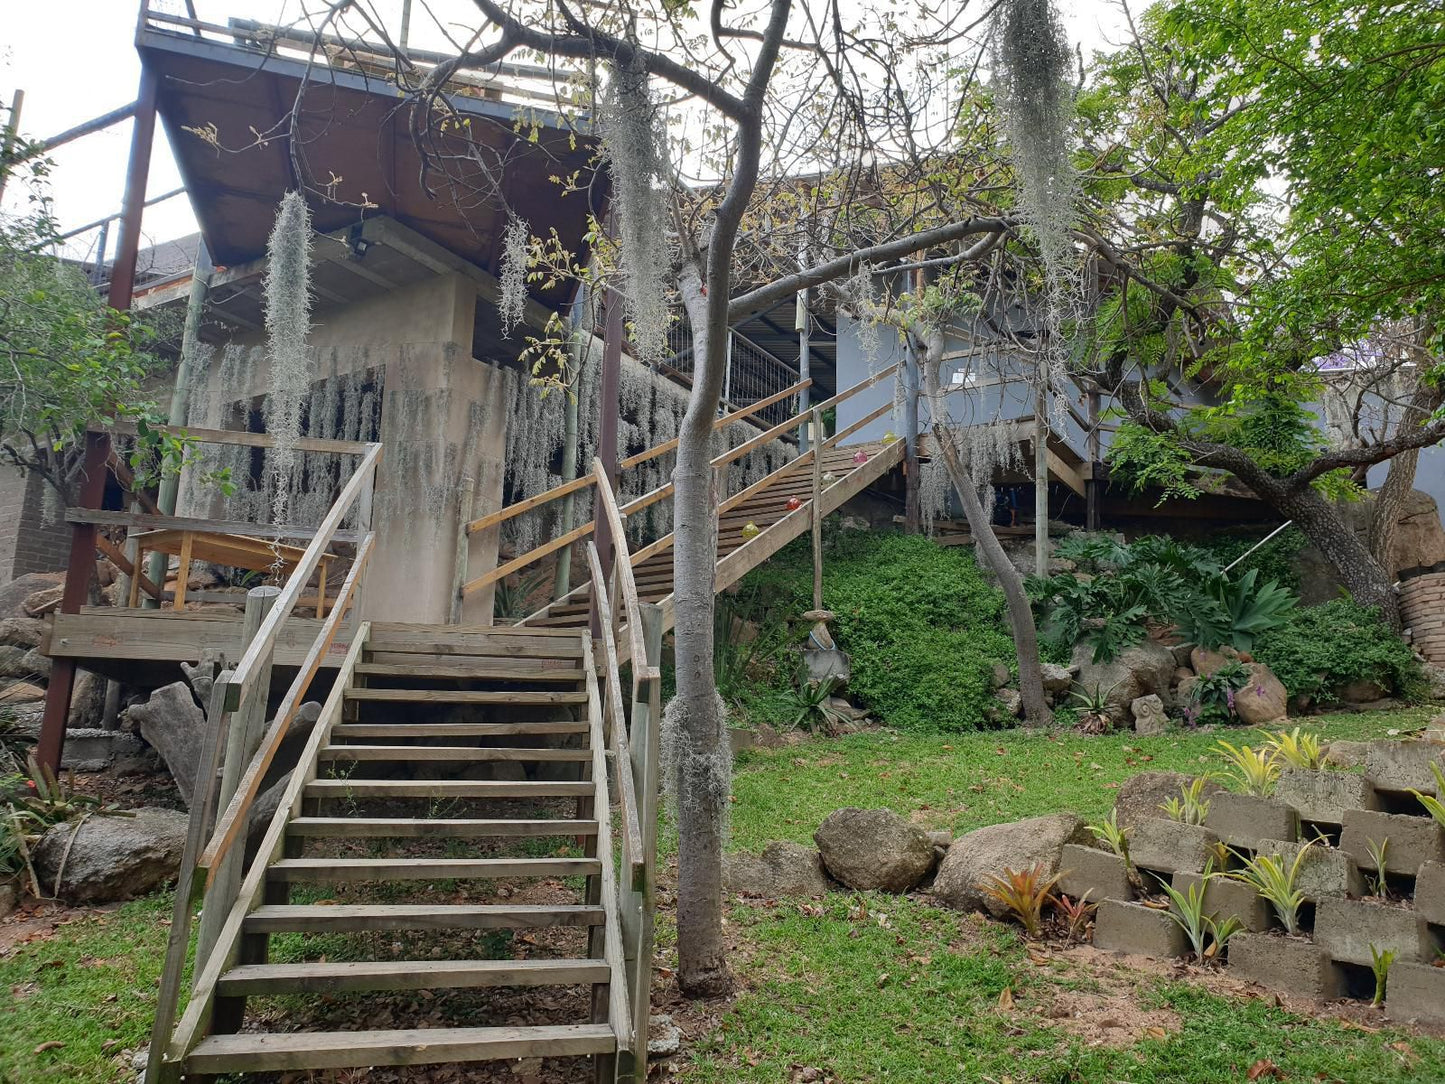 Wild Medlar Accommodation And Venue Nelspruit Mpumalanga South Africa Stairs, Architecture